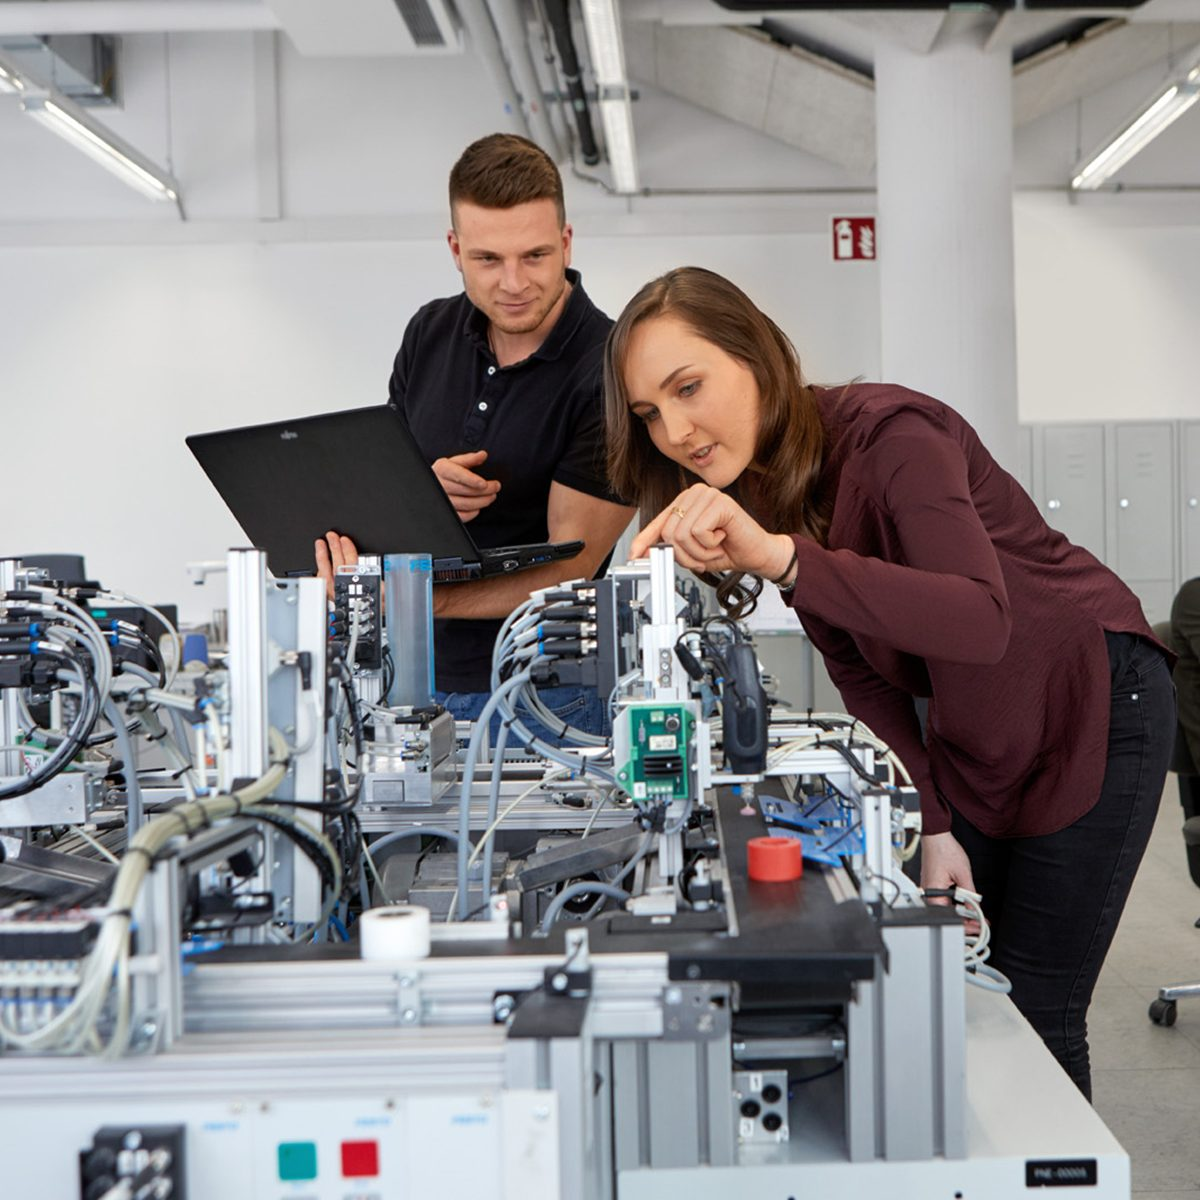 Apprenticeships and Dual Study Programs at Siemens.